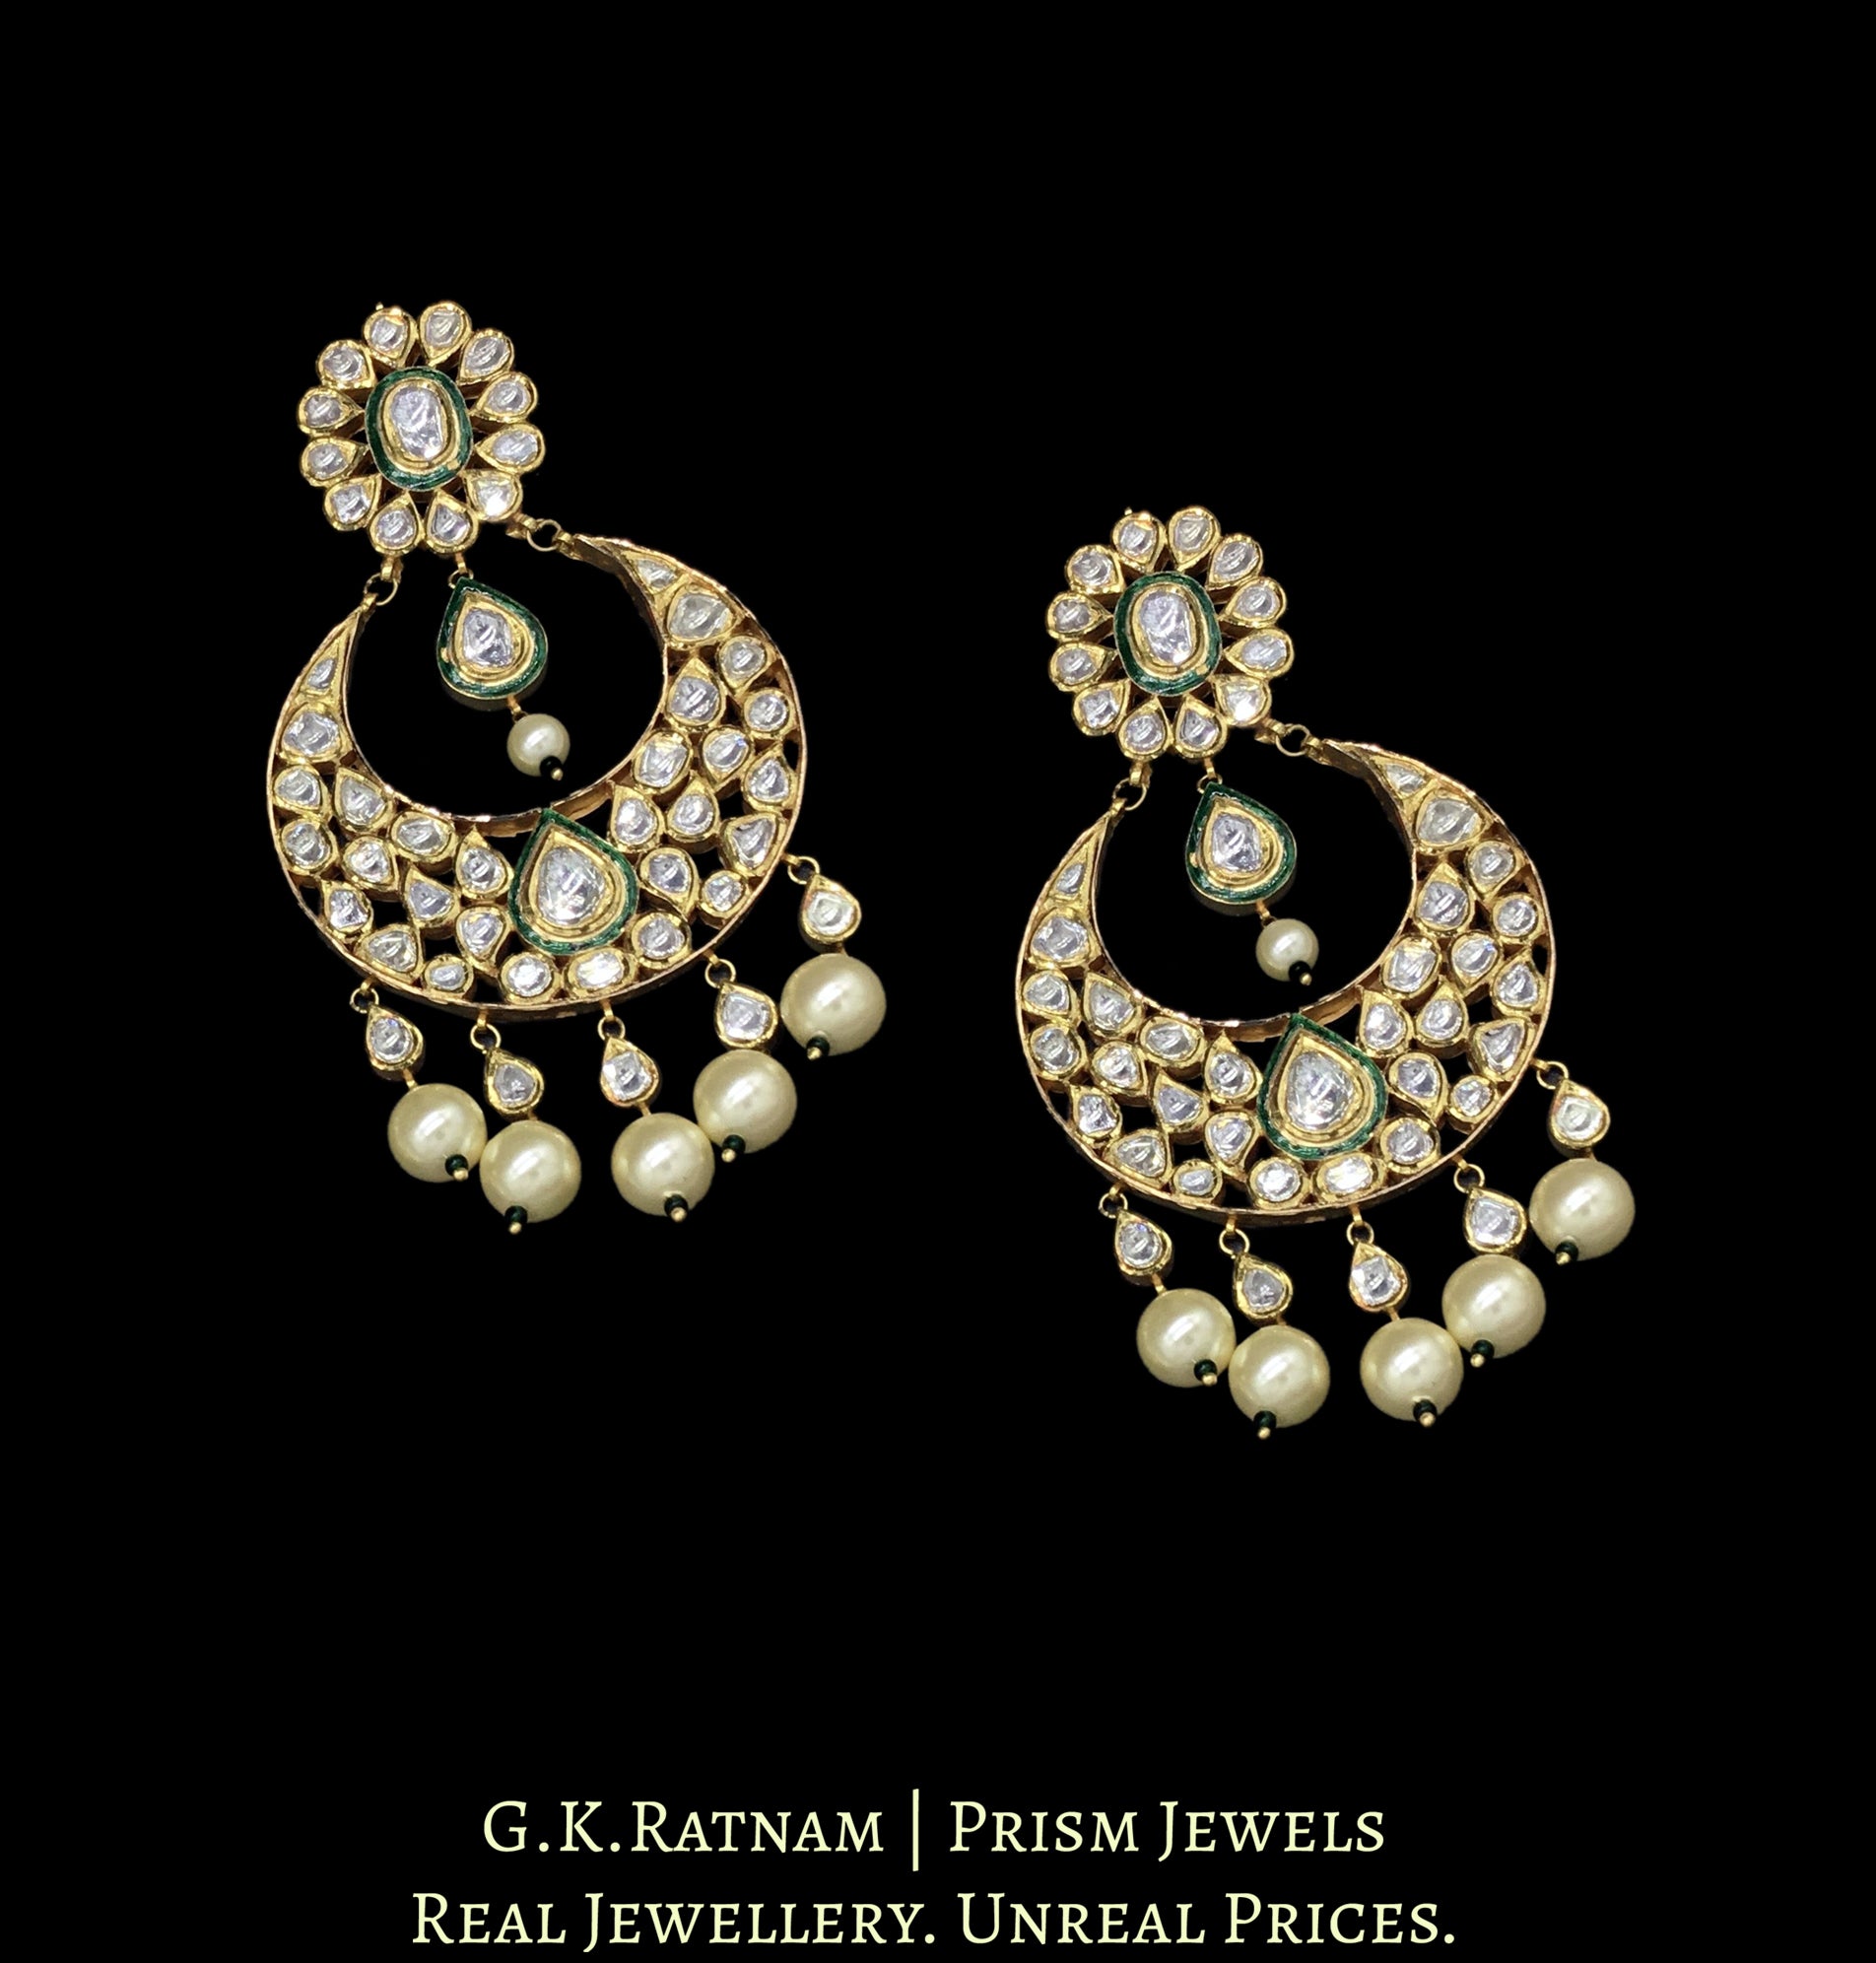 18k Gold and Diamond Polki Chand Bali Earring Pair with Green Enamel